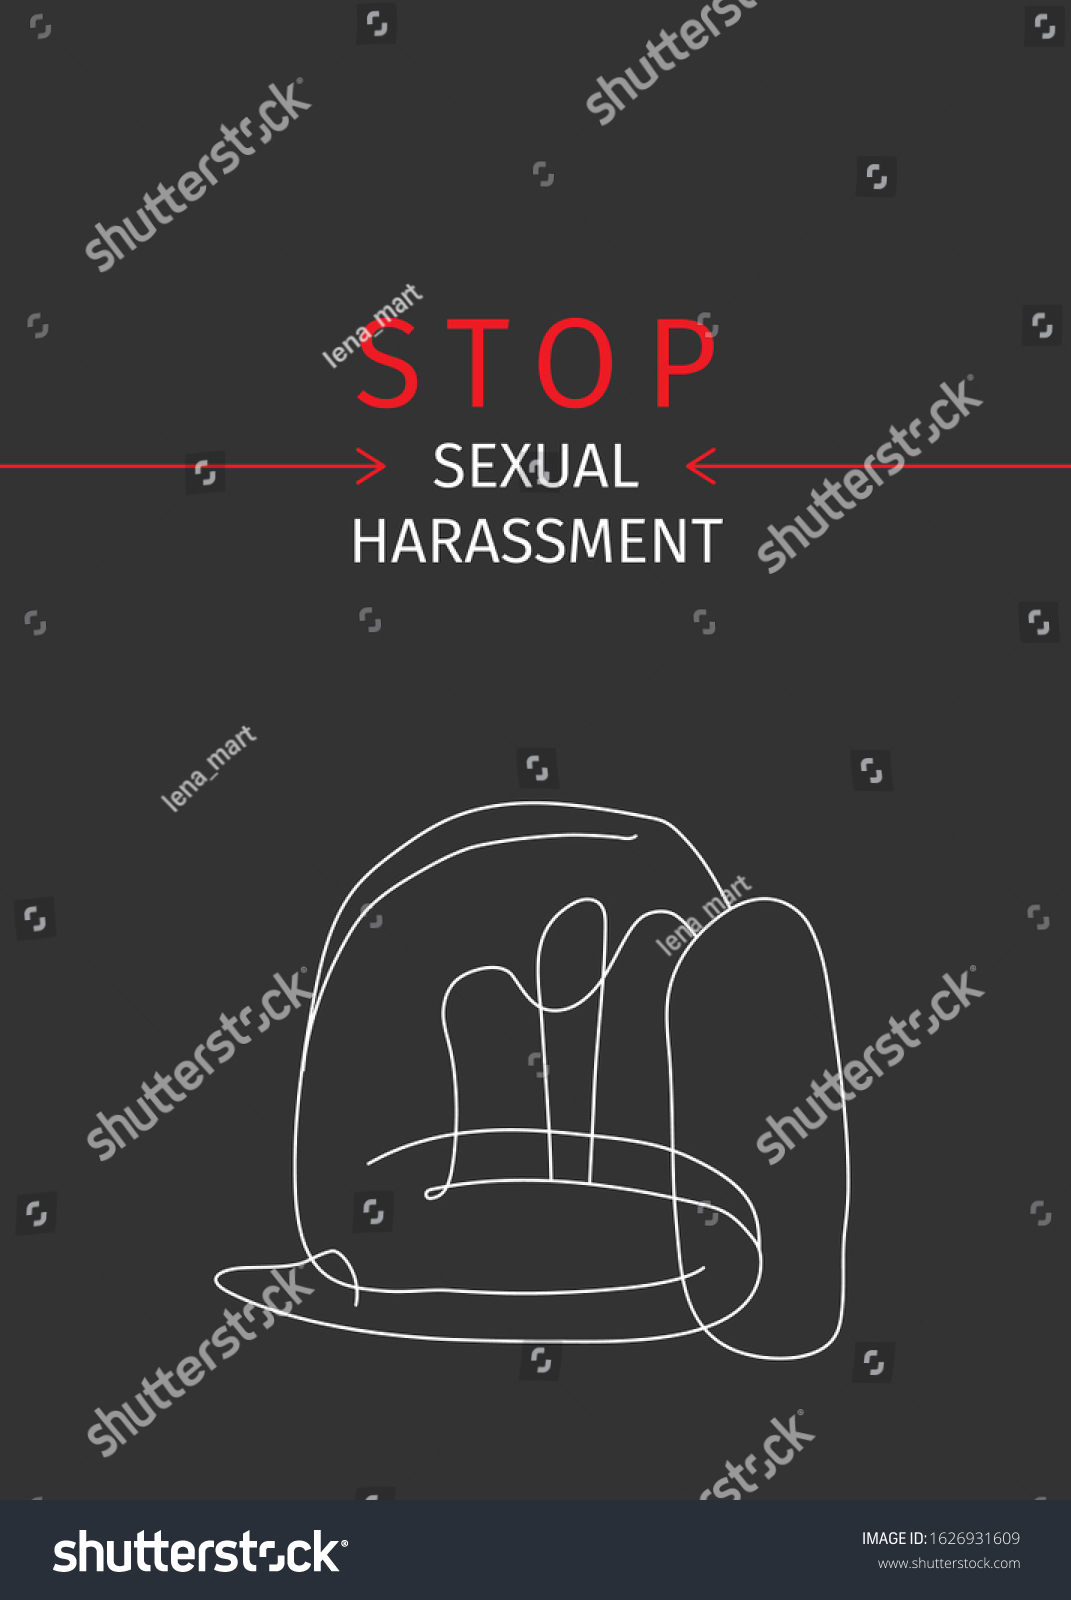 Harassment Poster Stop Sexual Harassment Womens Stock Vector Royalty Free 1626931609 